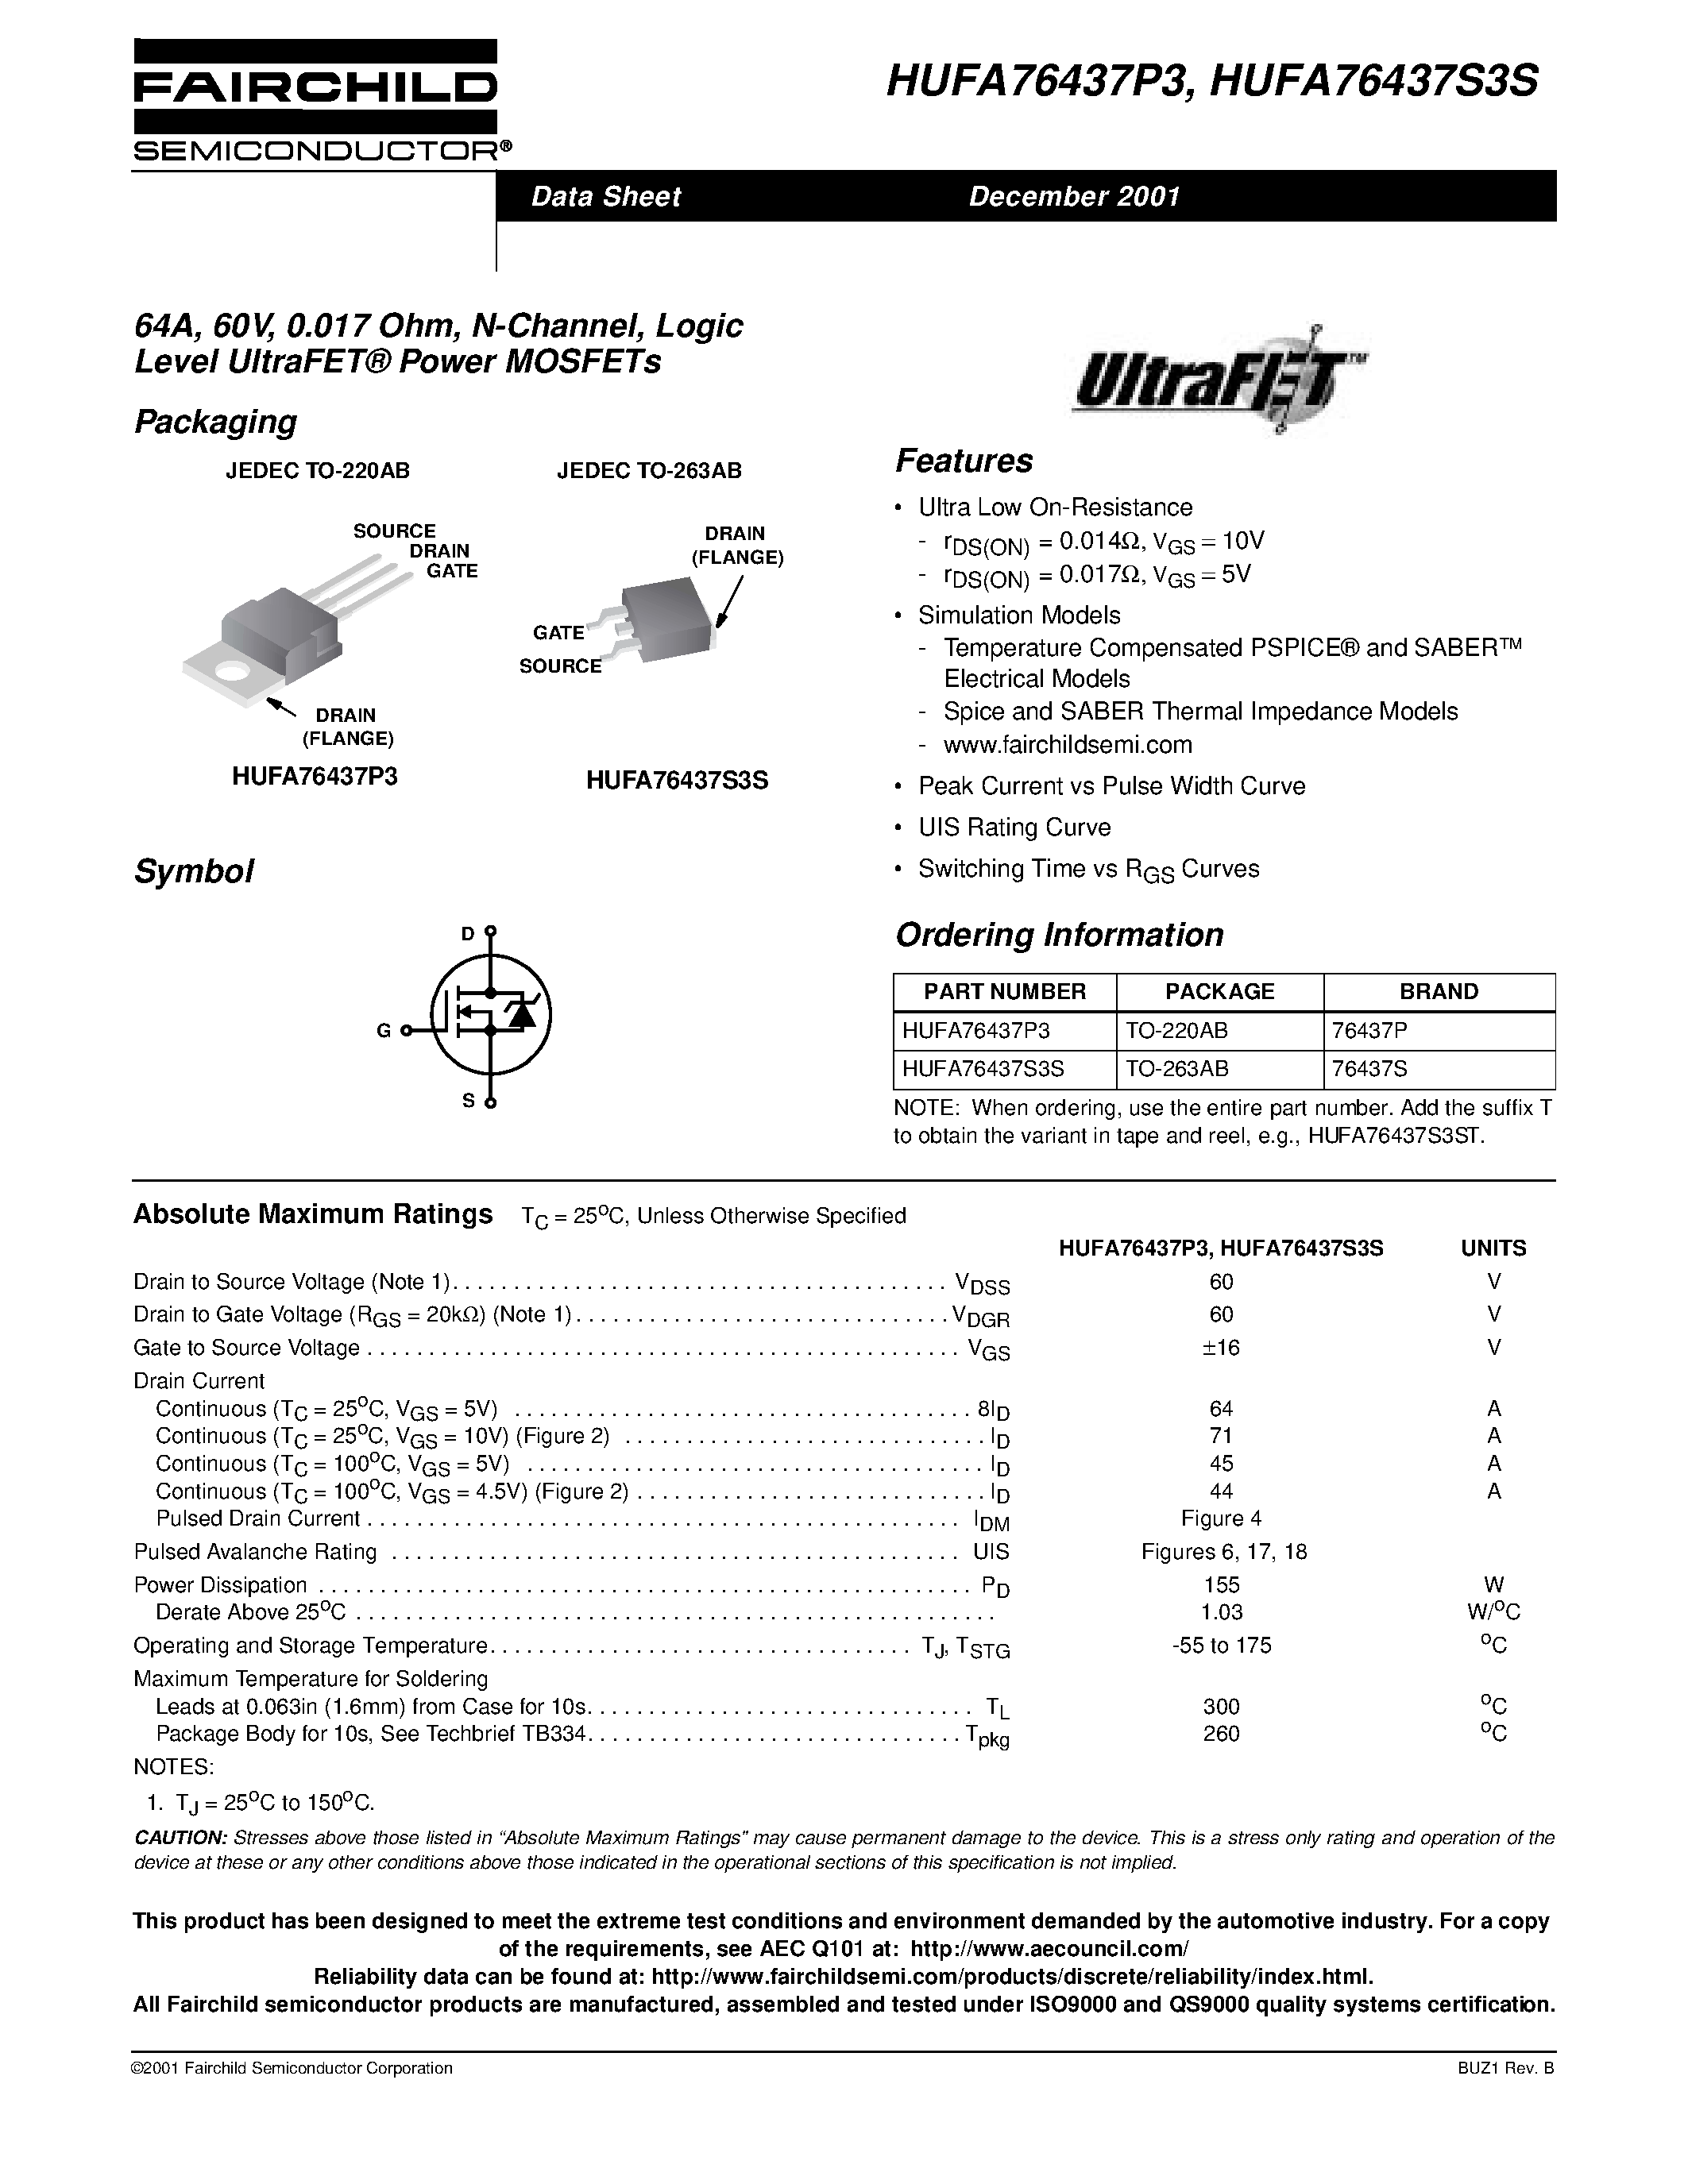 Datasheet HUFA76437S3S - 64A/ 60V/ 0.017 Ohm/ N-Channel/ Logic Level UltraFET Power MOSFETs page 1